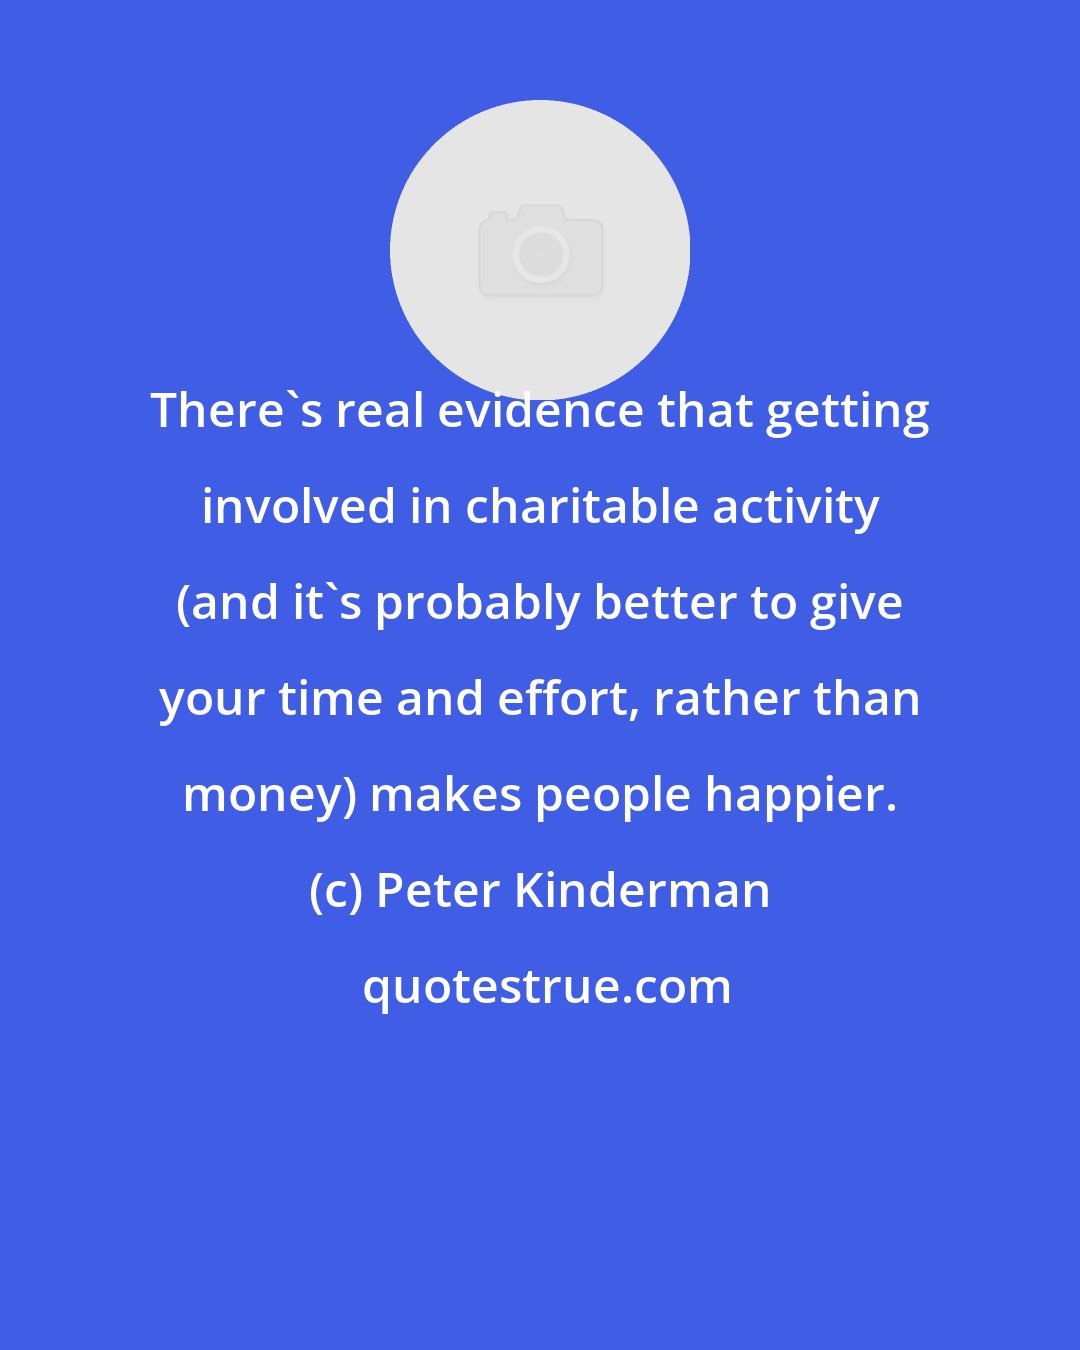 Peter Kinderman: There's real evidence that getting involved in charitable activity (and it's probably better to give your time and effort, rather than money) makes people happier.